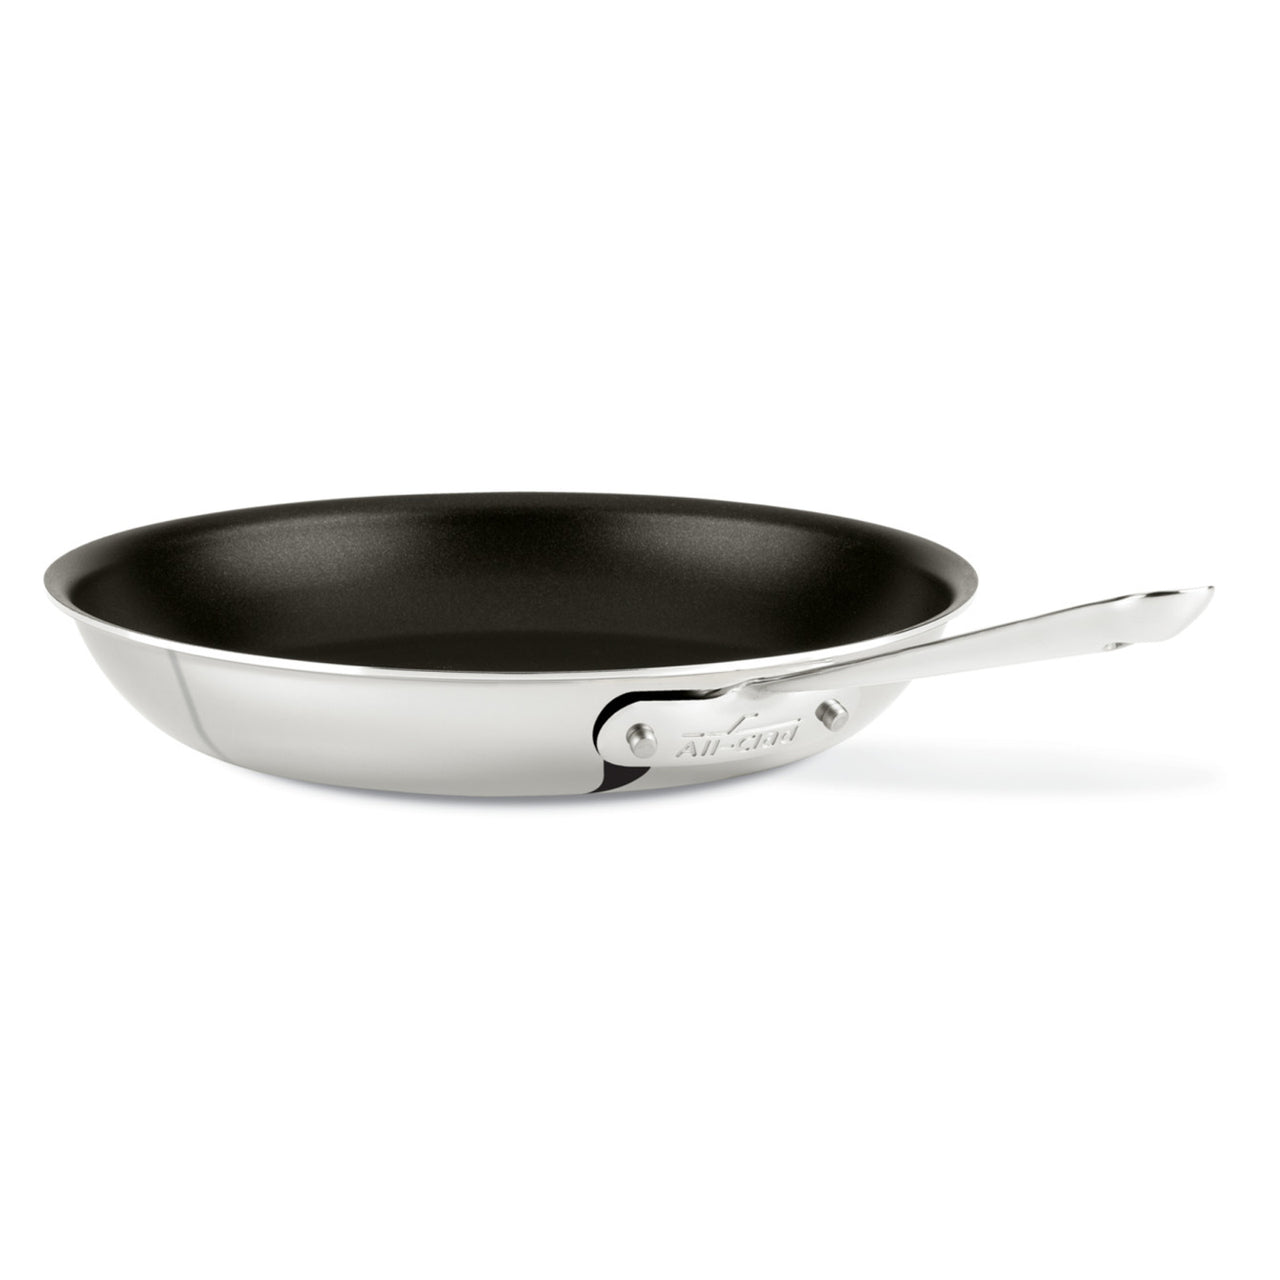 All-Clad d3 / TriPly Non-Stick Frying Pan